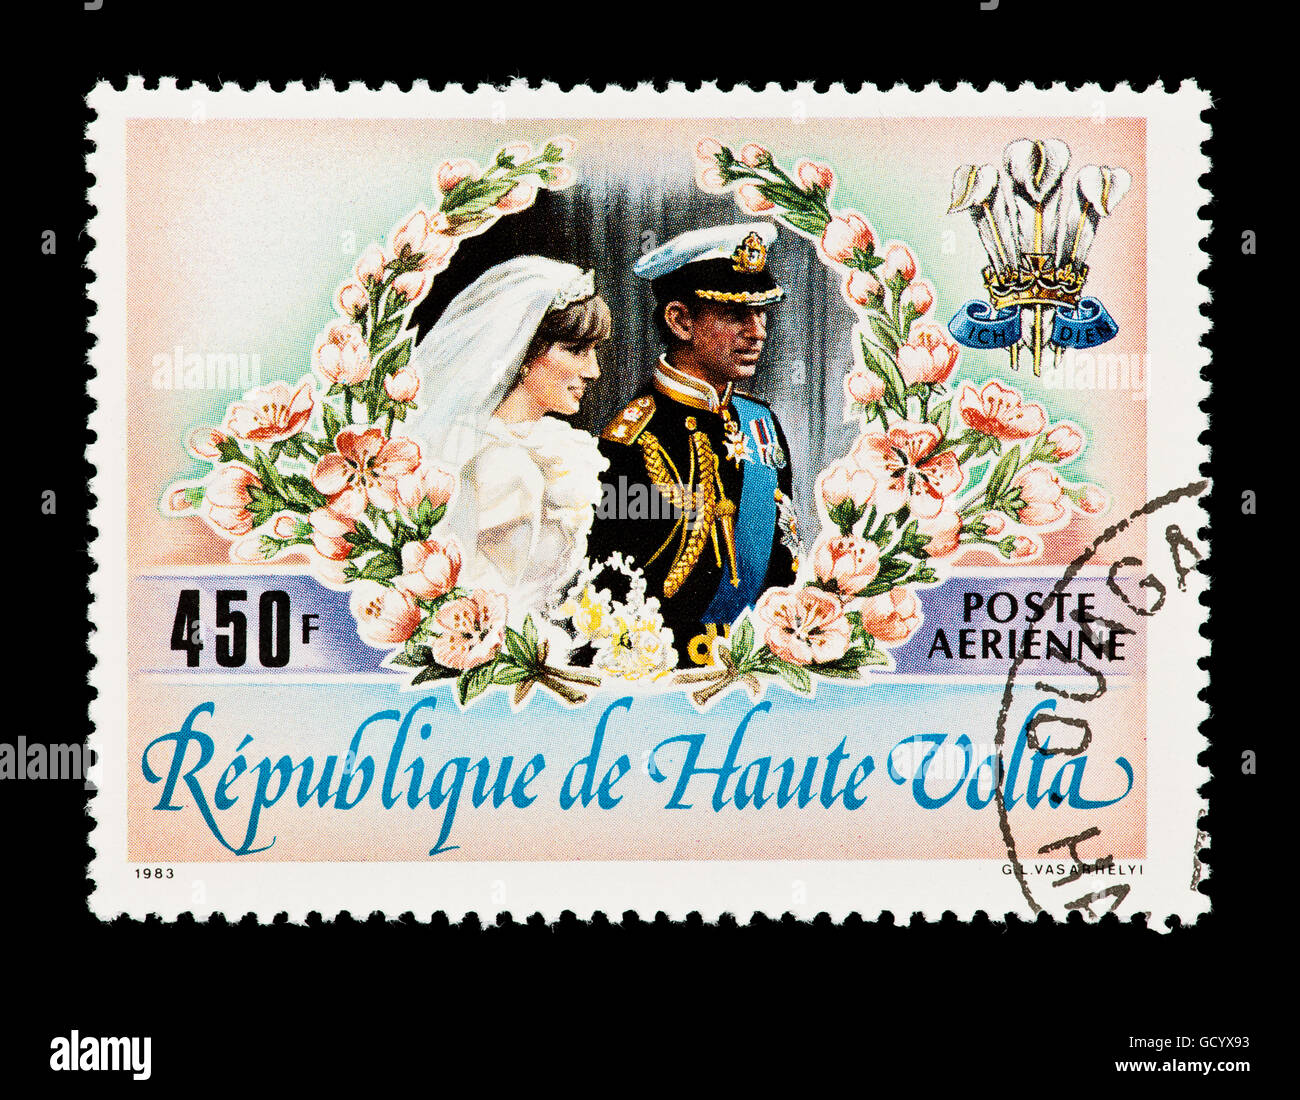 Postage stamp from Upper Volta (Burkina Faso) depicting Prince Charles and Princess Diana on their wedding. Stock Photo